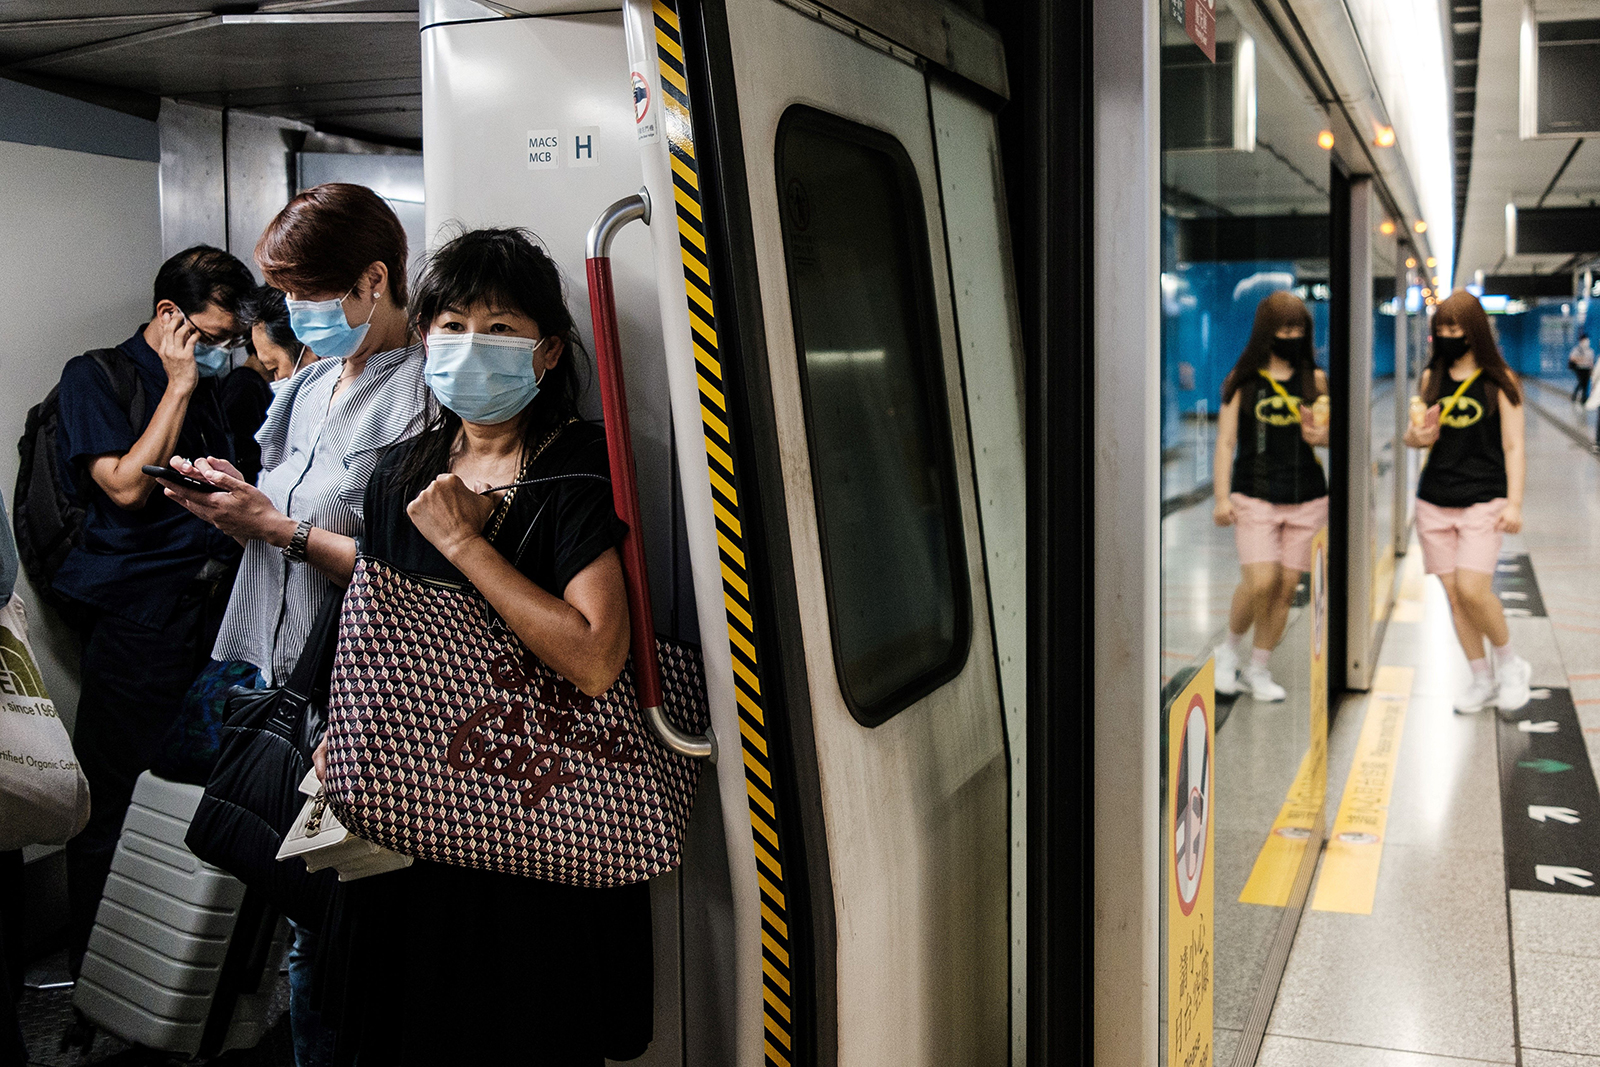 Commuters wear face masks on a metro train in Hong Kong on July 15.